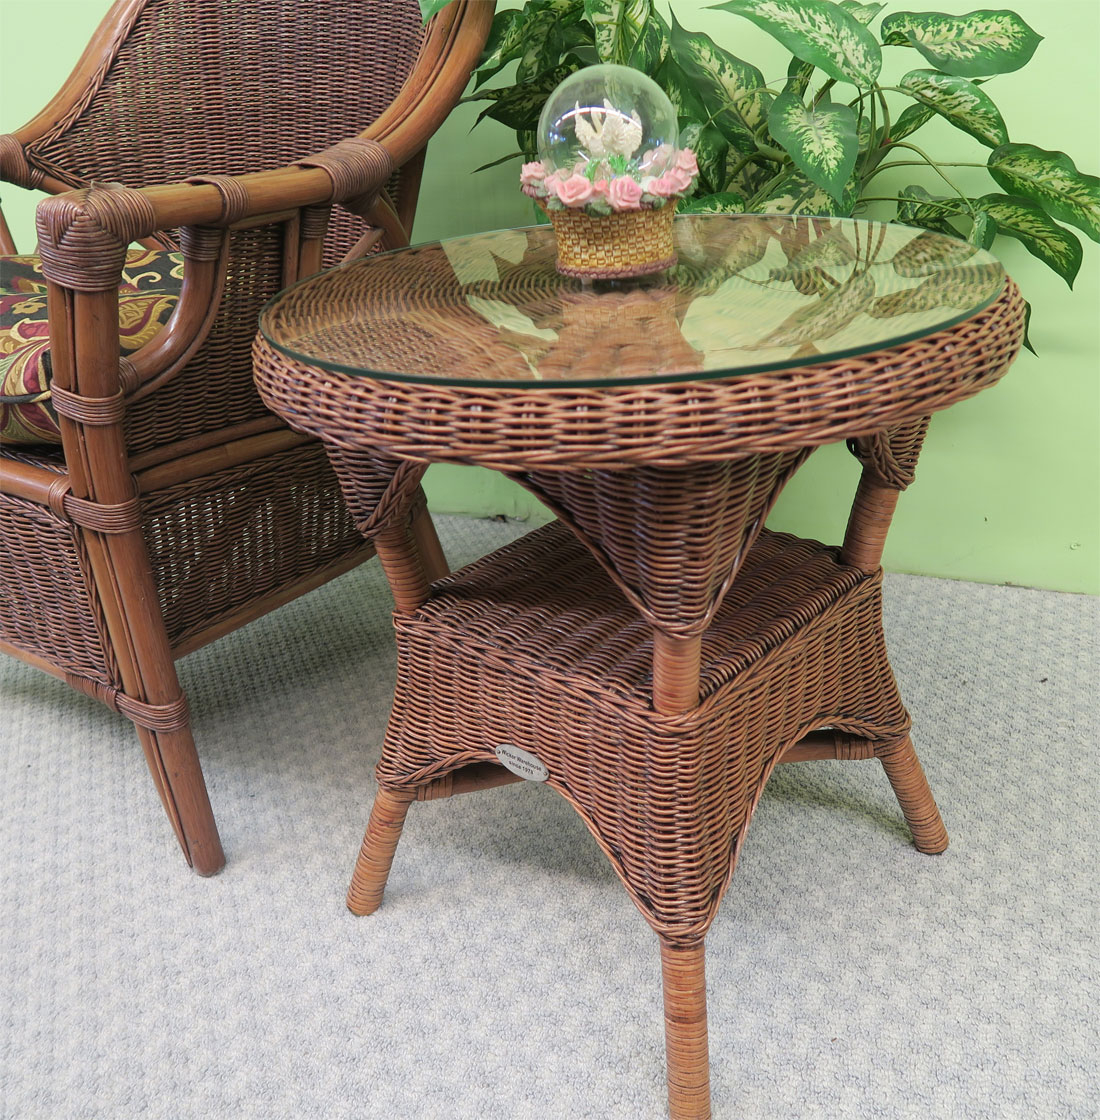 Wicker End Table w/Glass Top , Natural Wicker Santa Fe Style (2) Colors